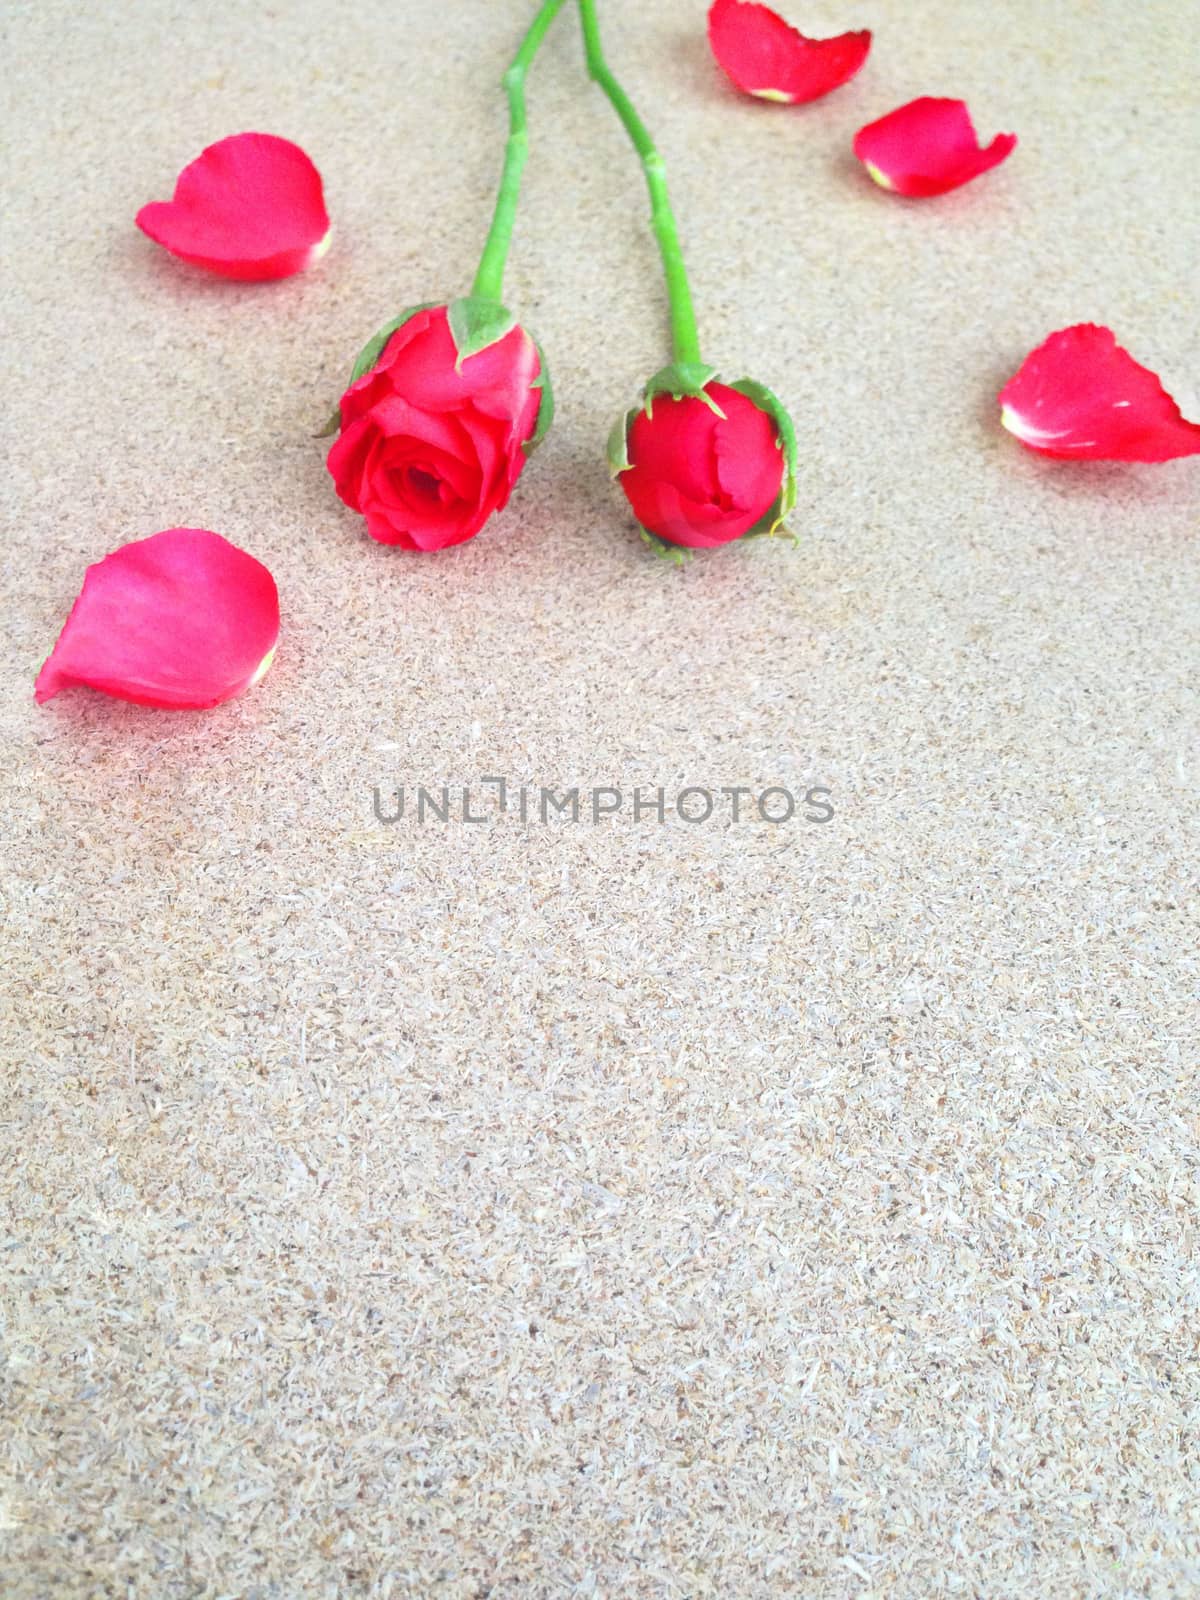 rose on plywood background by Bowonpat